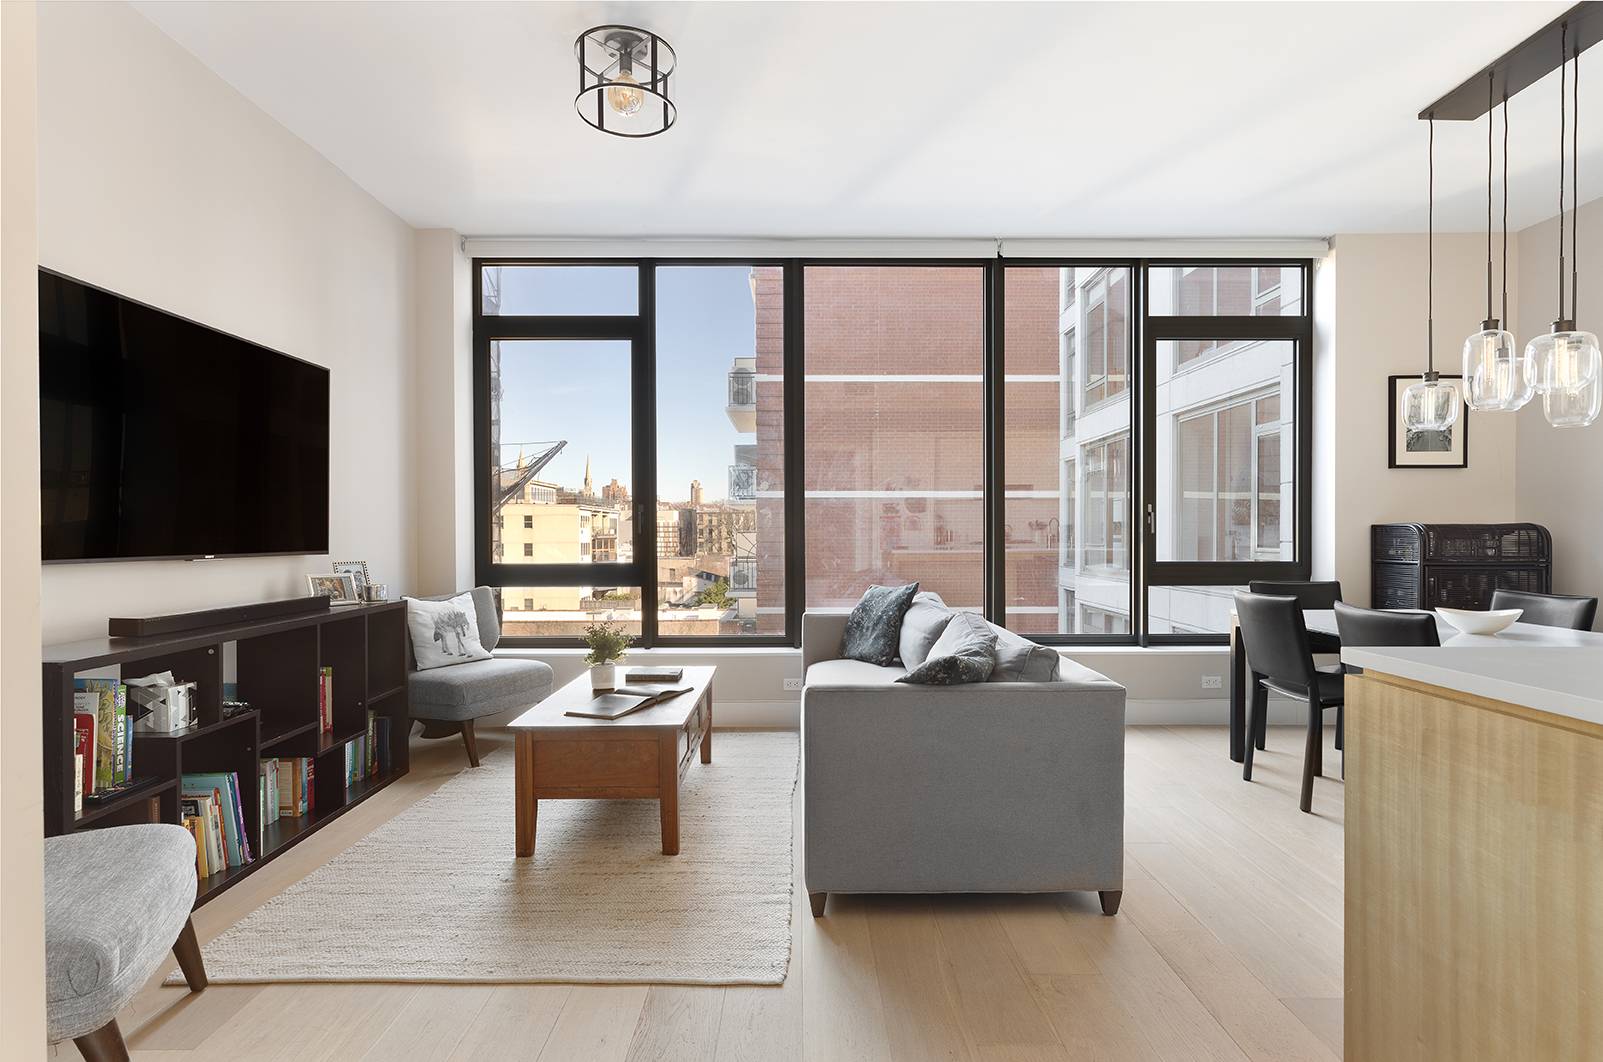 251 1st Street offers precise layout with an intuitive flow and a personality all its own, this residence features floor to ceiling glass windows with east west exposure, 9'4 ceilings, ...